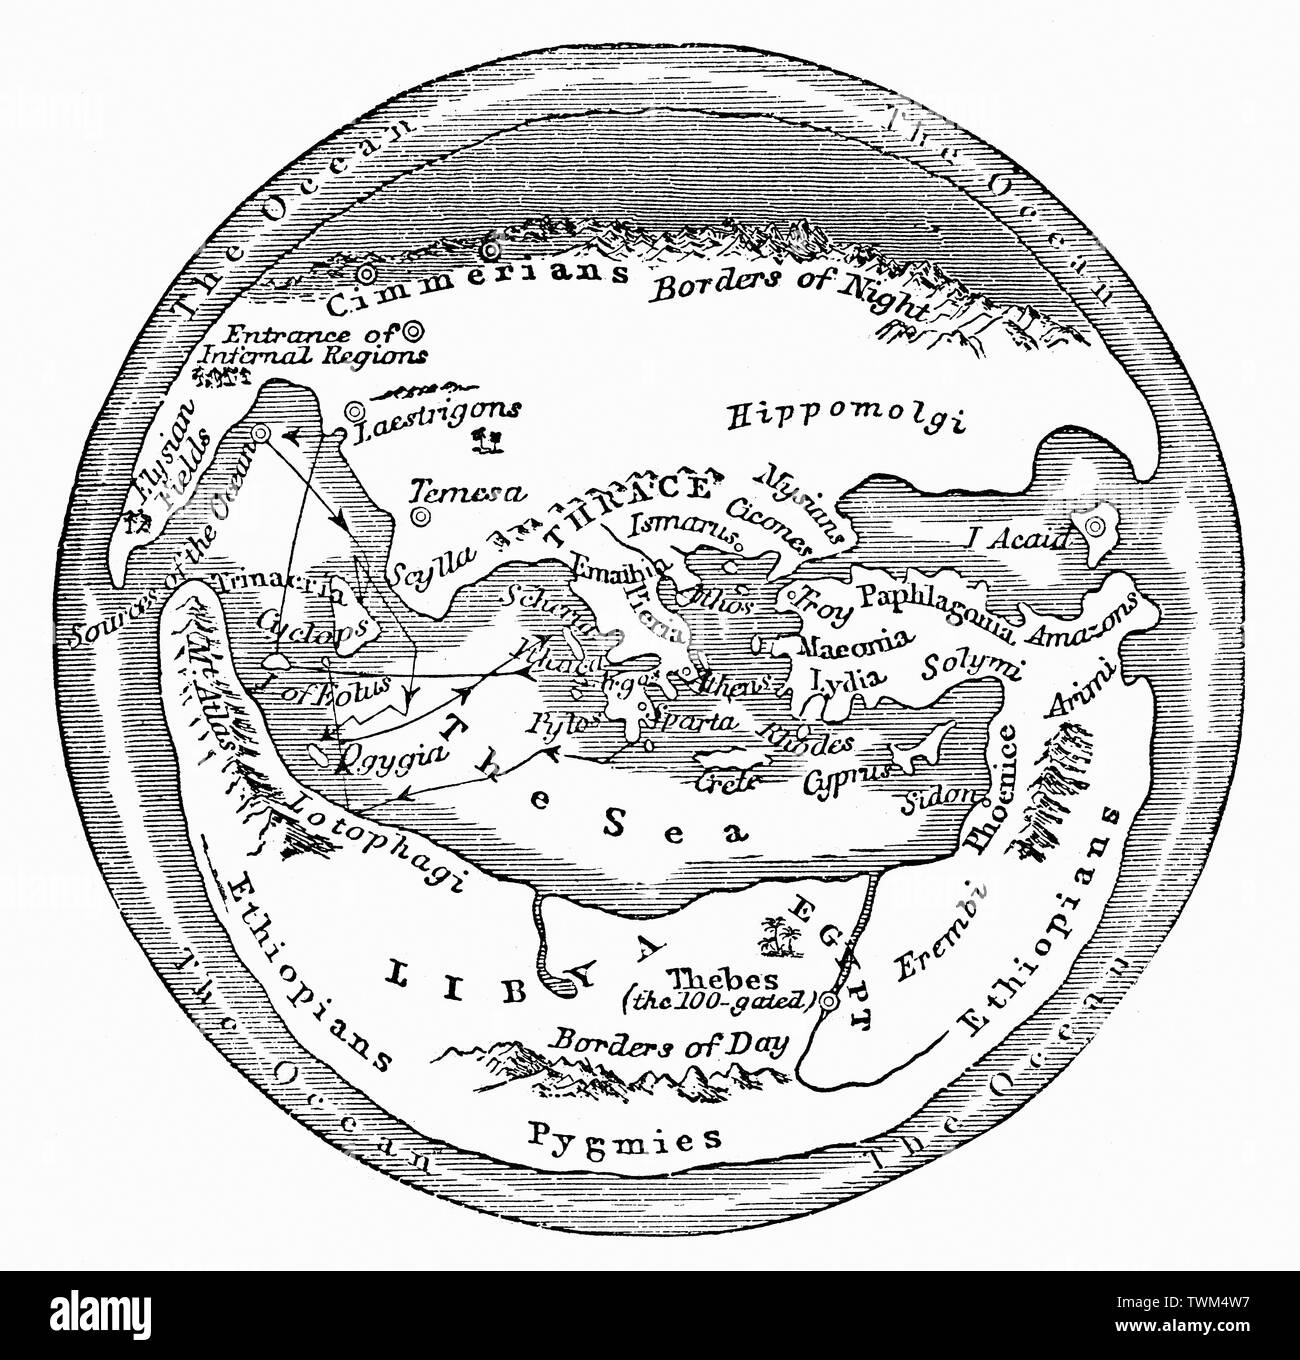 The World According to Homer (B.C. 900).   He believed the world to be circular, with the river Oceanus flowing around it. Beyond Oceanus in the north, are the Cimmerii, an ancient people of the far north of Europe, described by Homer as the people living in perpetual darkness. He also notes Elysiun, the place of the afterlife for the gods and the heroic. Homer in his Odyssey describes it as paradise. Stock Photo